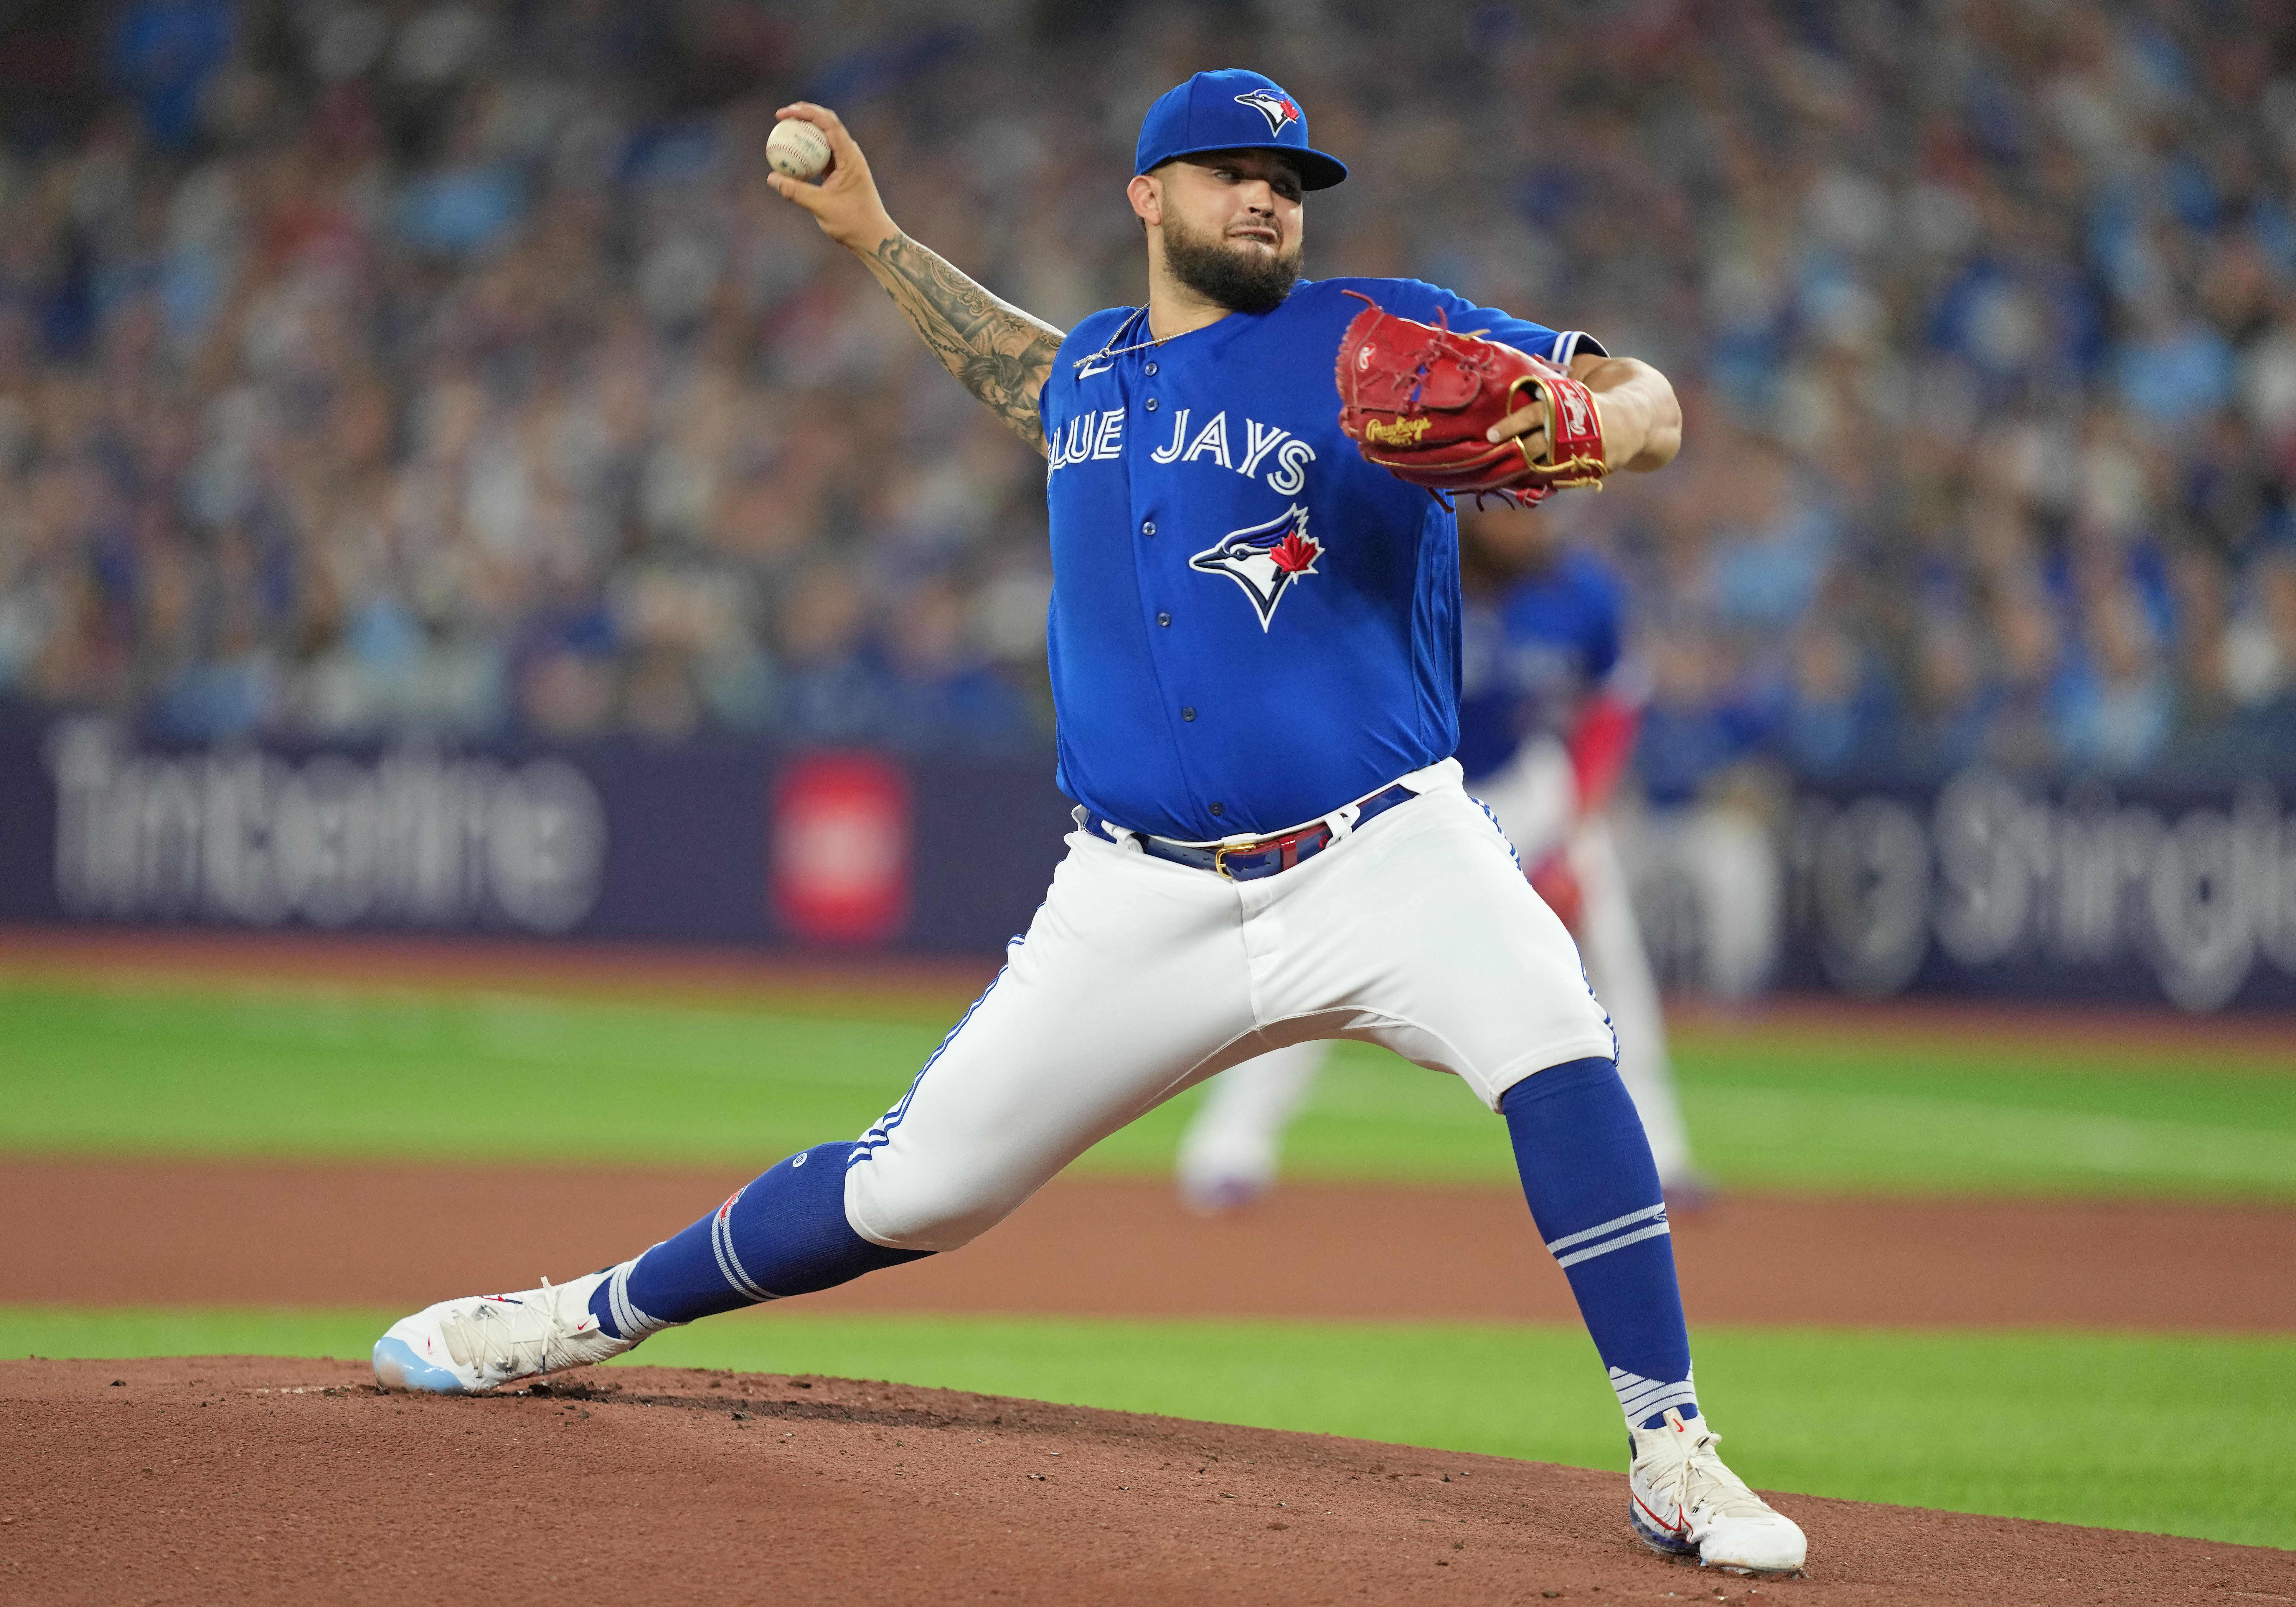 Toronto Blue Jays home opener: Everything you need to know